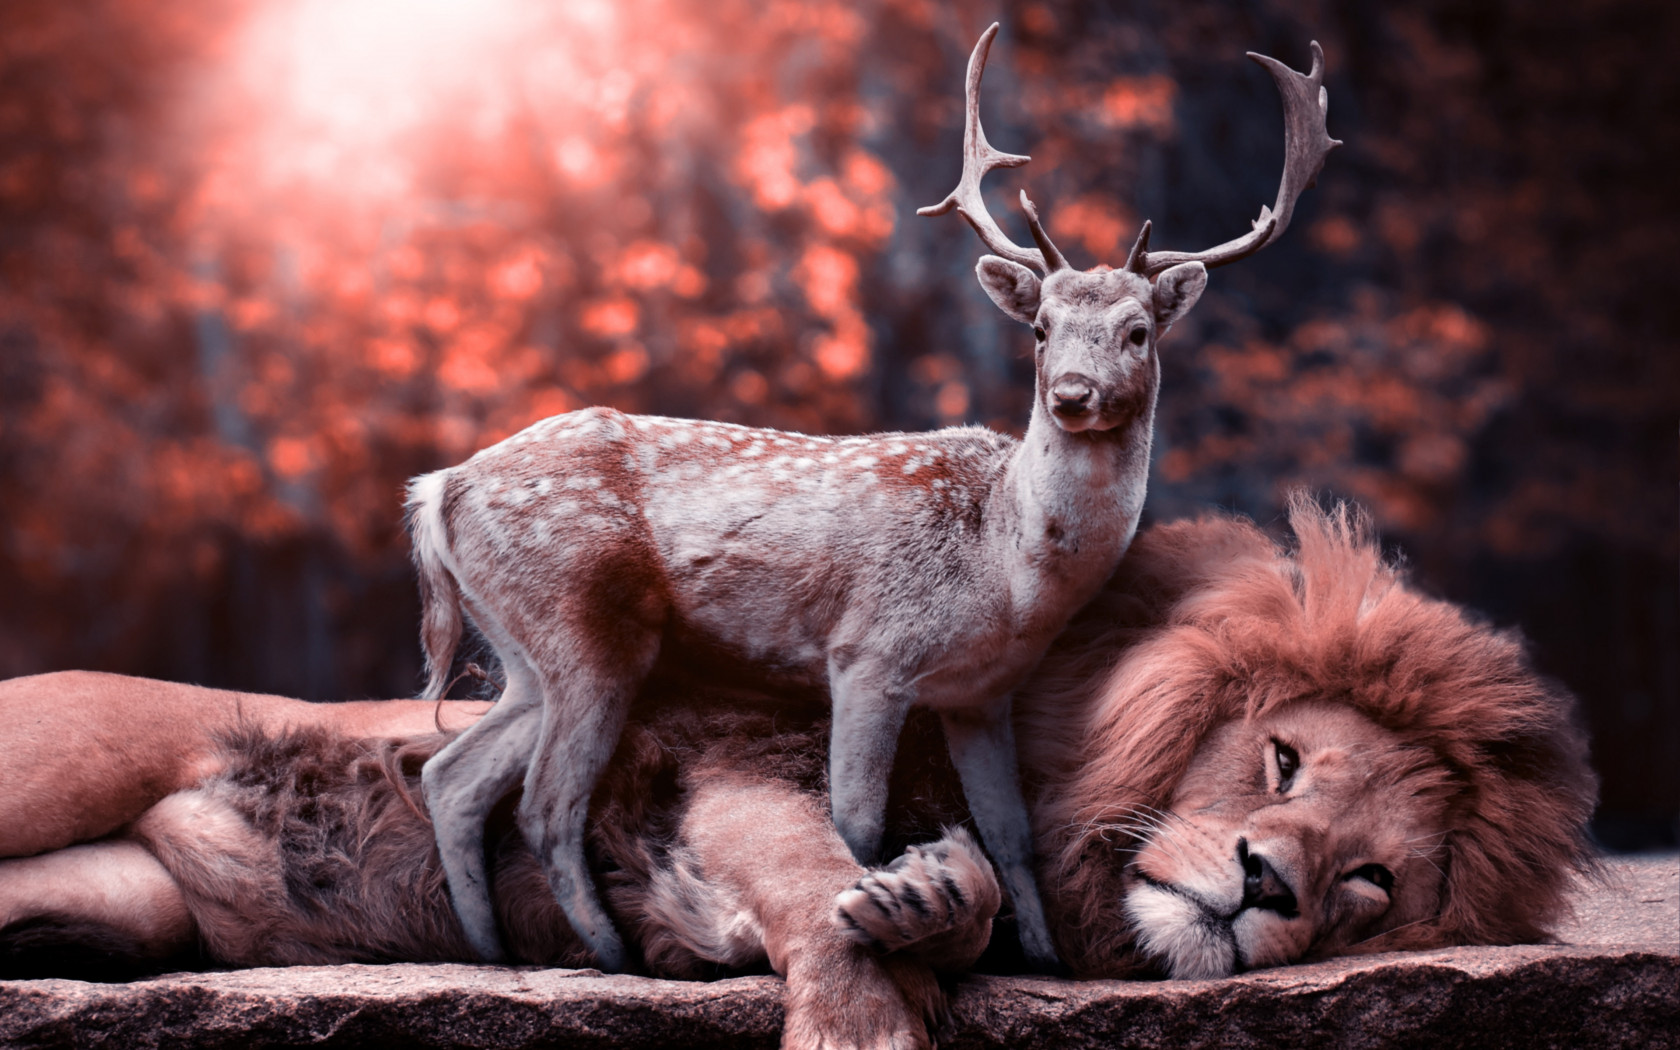 The lion and the deer wallpaper 1680x1050